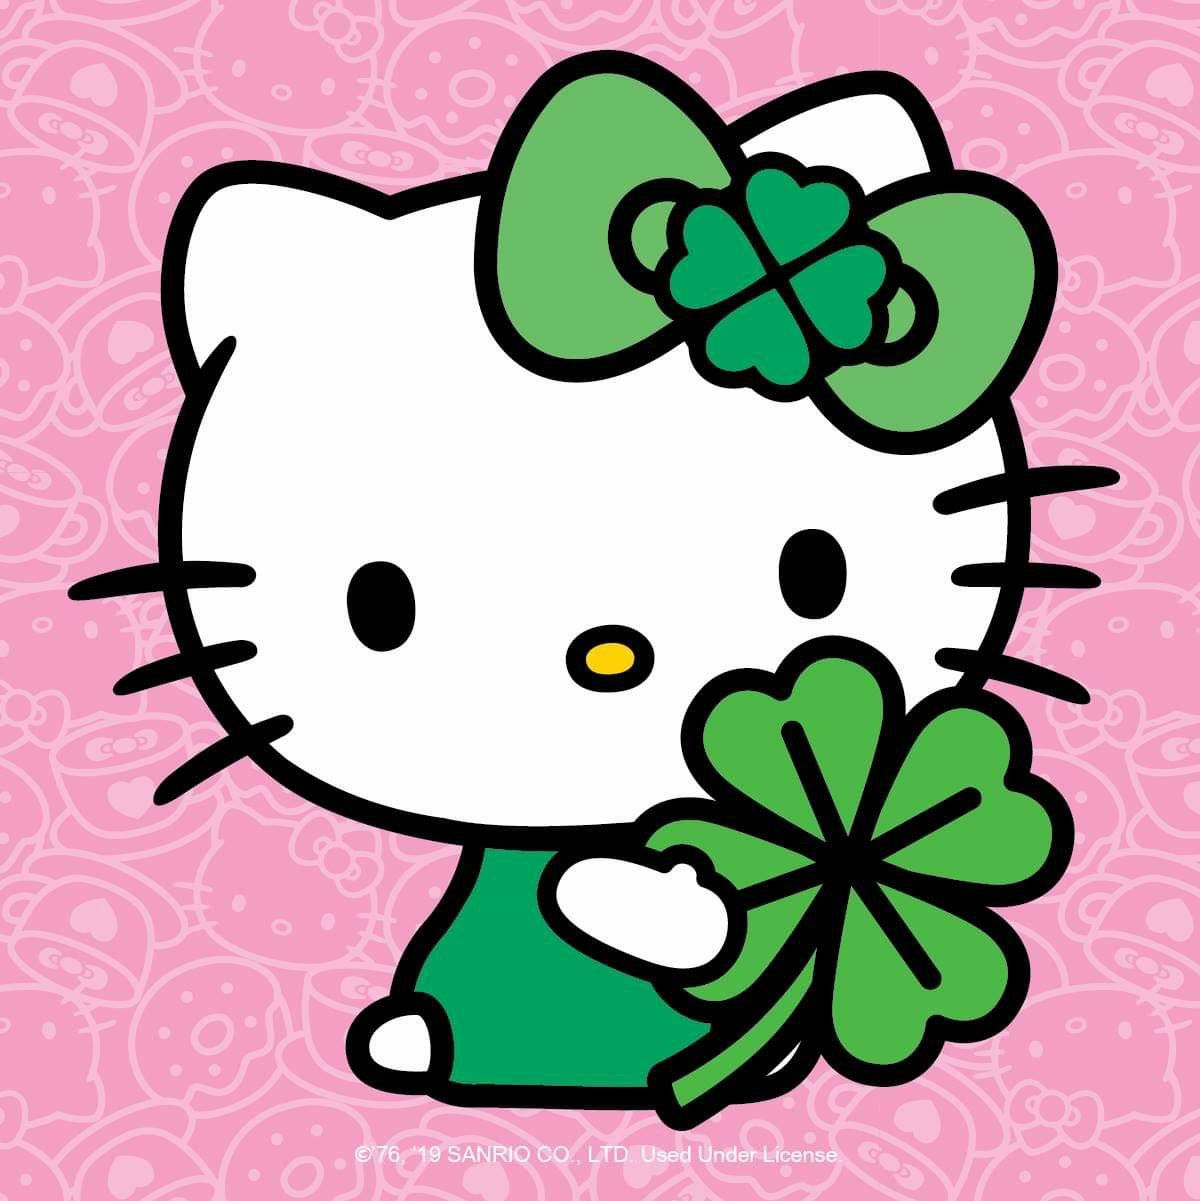 Sweet & Lucky! Happy St. Patrick's Day from The Hello Kitty Cafe